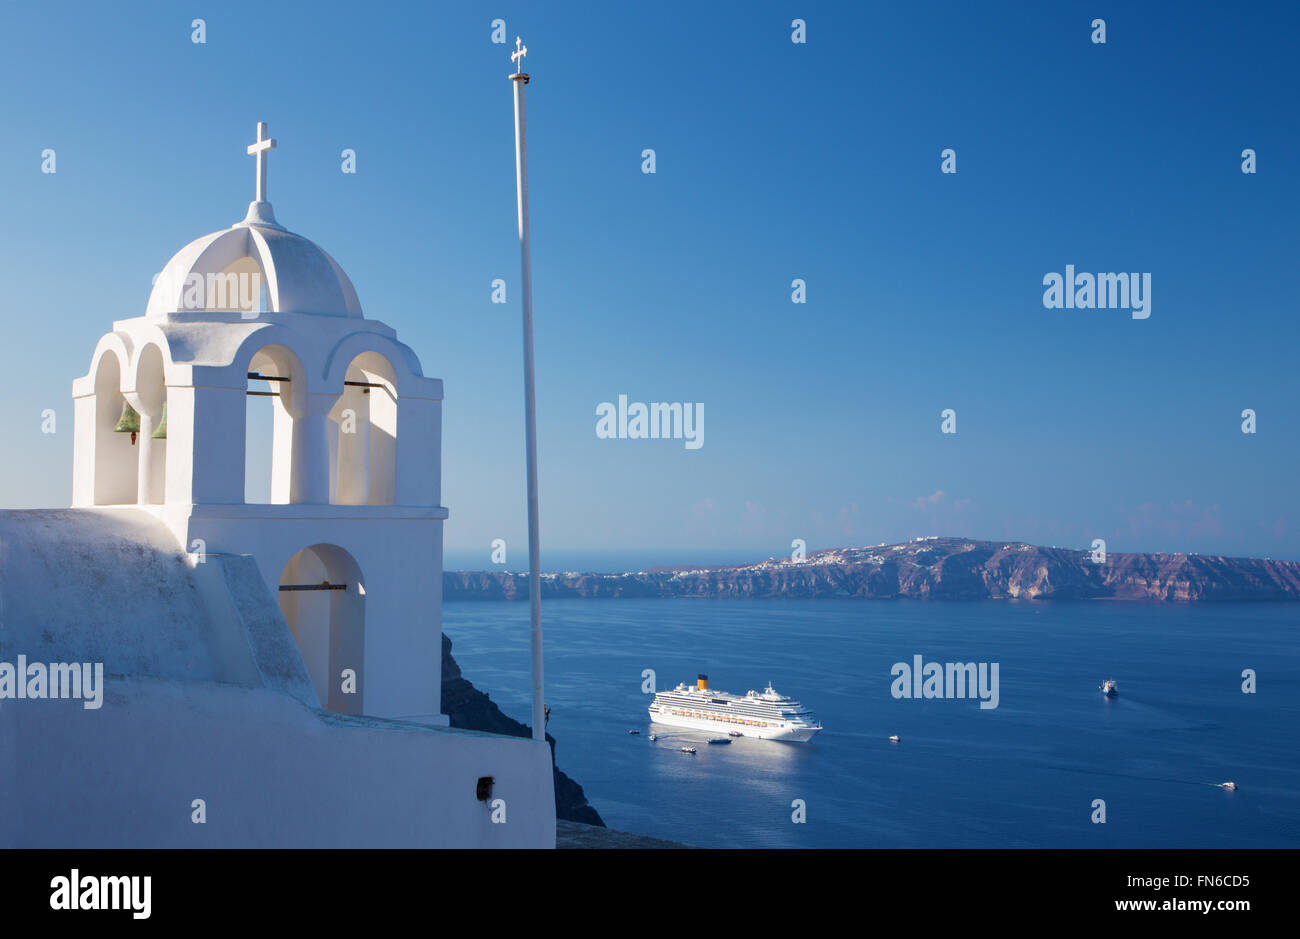 Santorini - The outlook from Fira ower the church tower to caldera and the cruise. Stock Photo